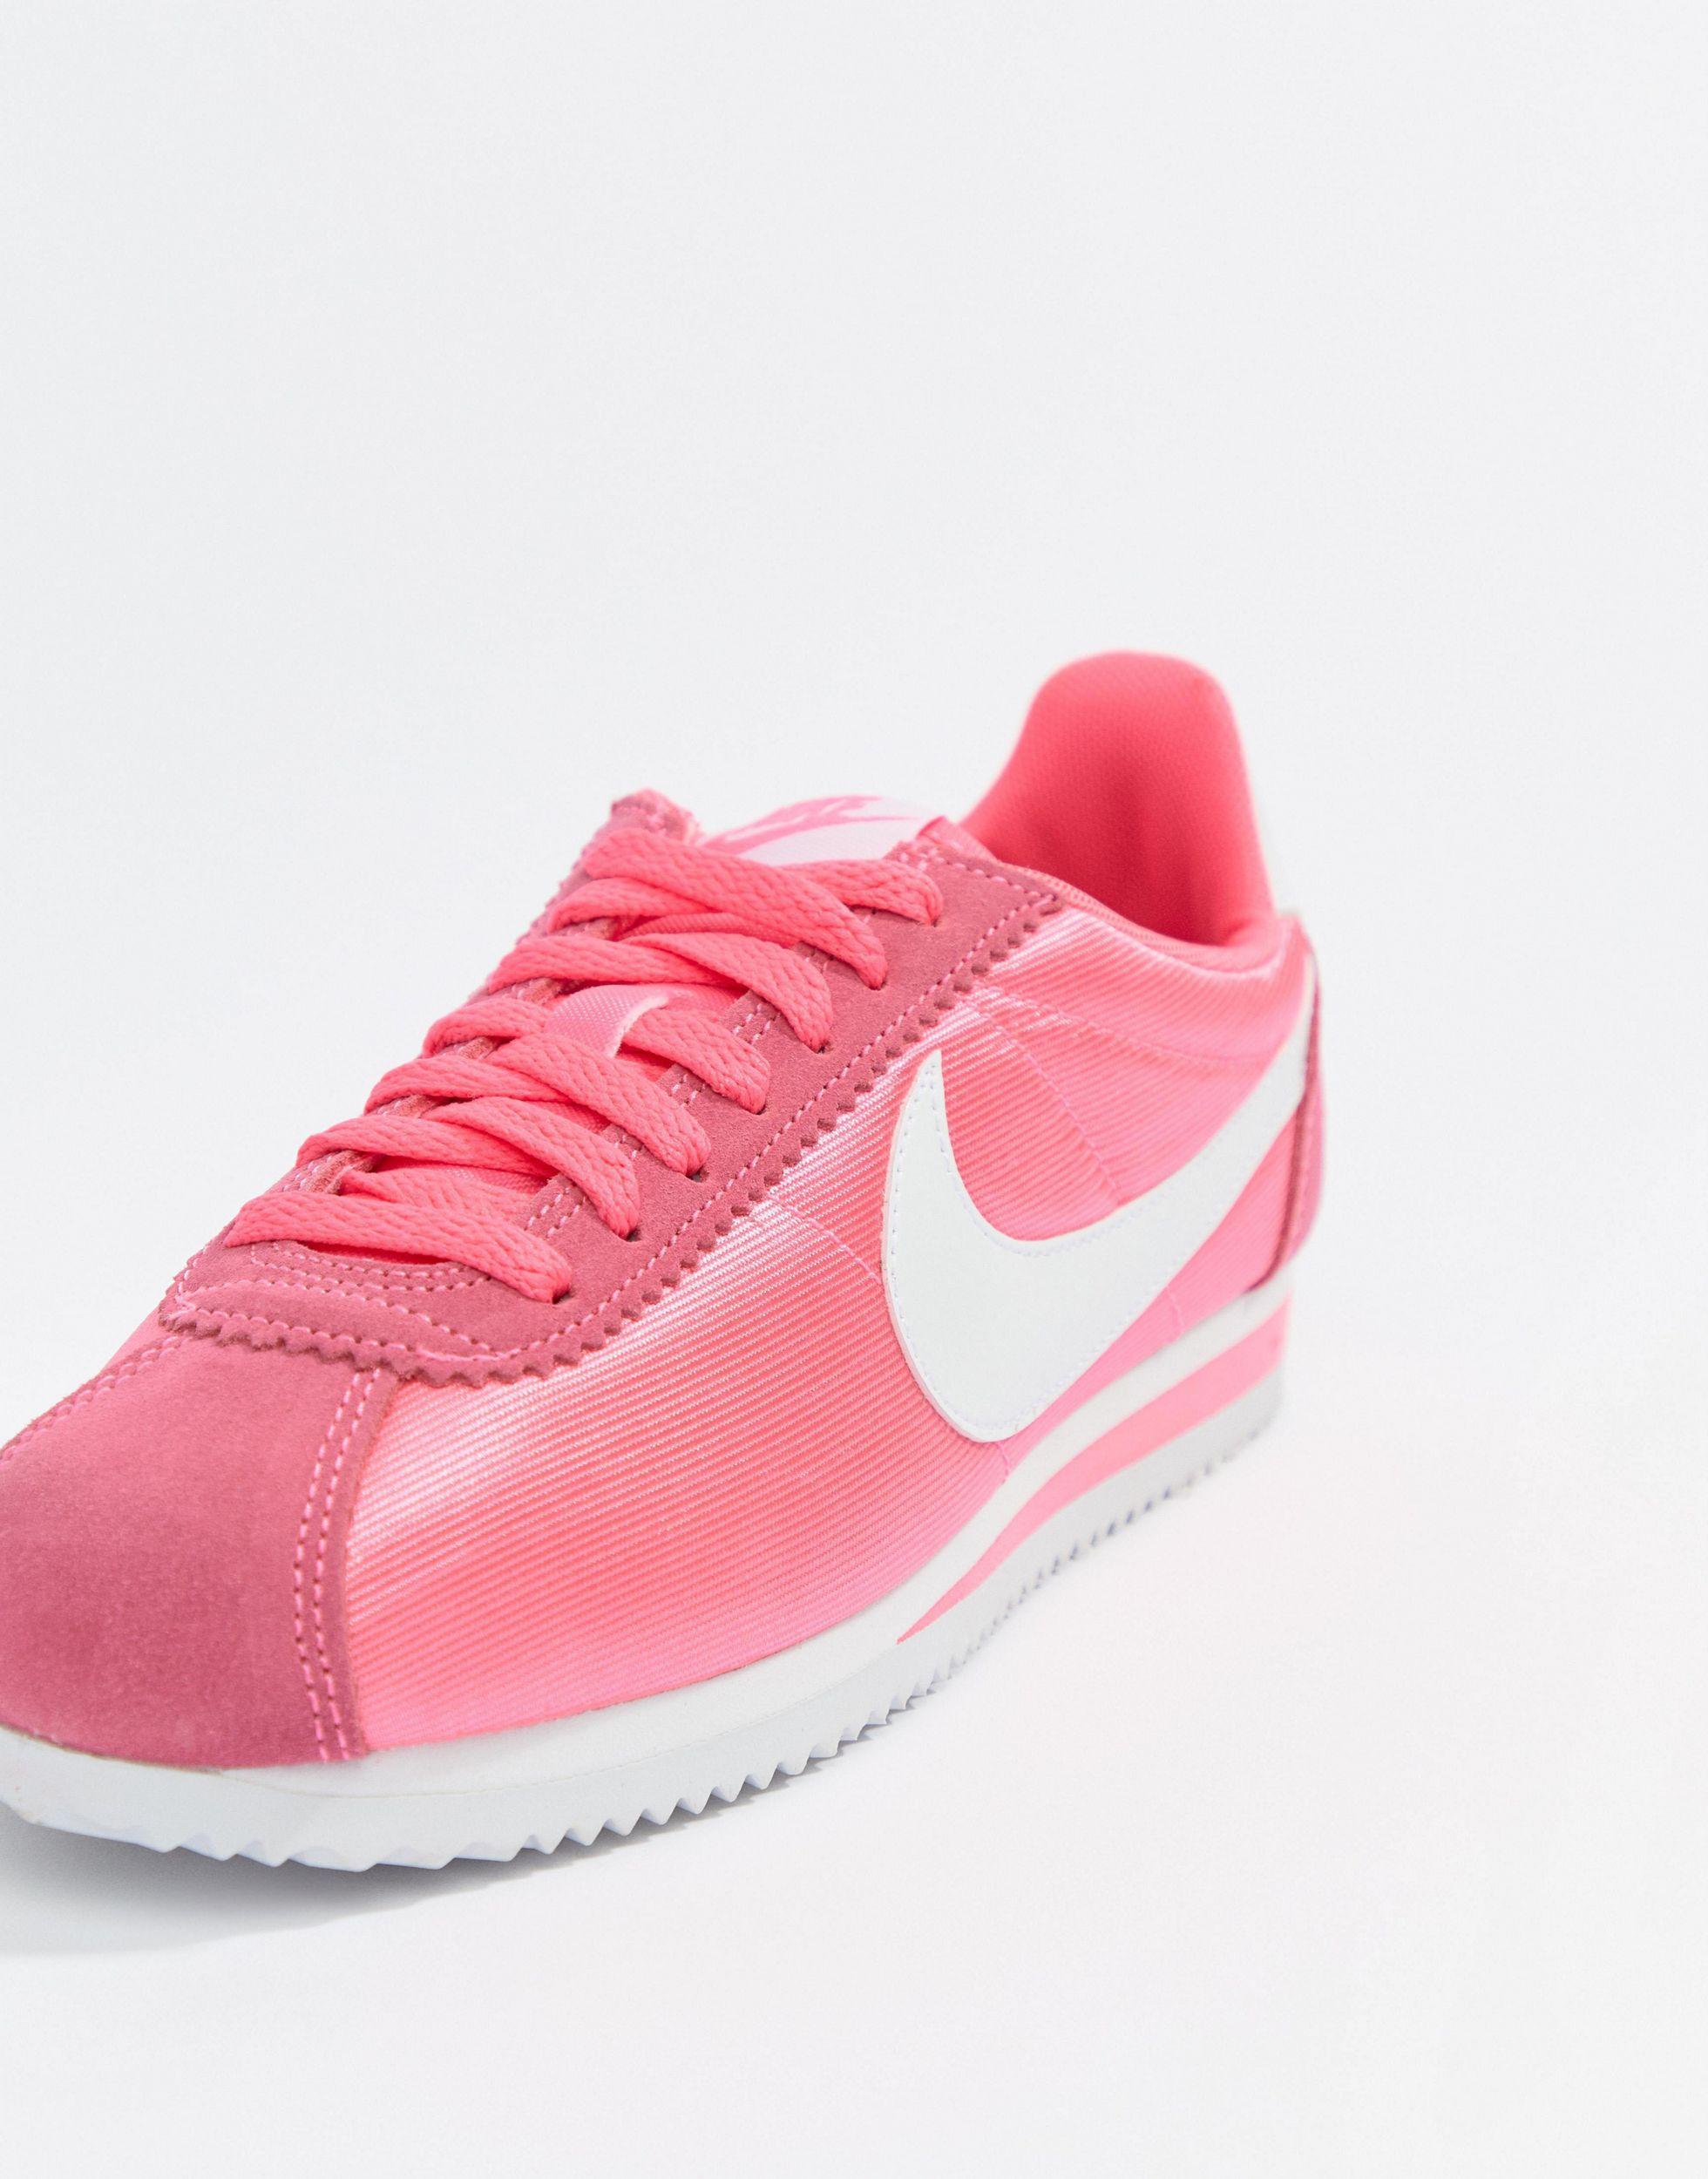 nike pink with swoosh suede cortez trainers